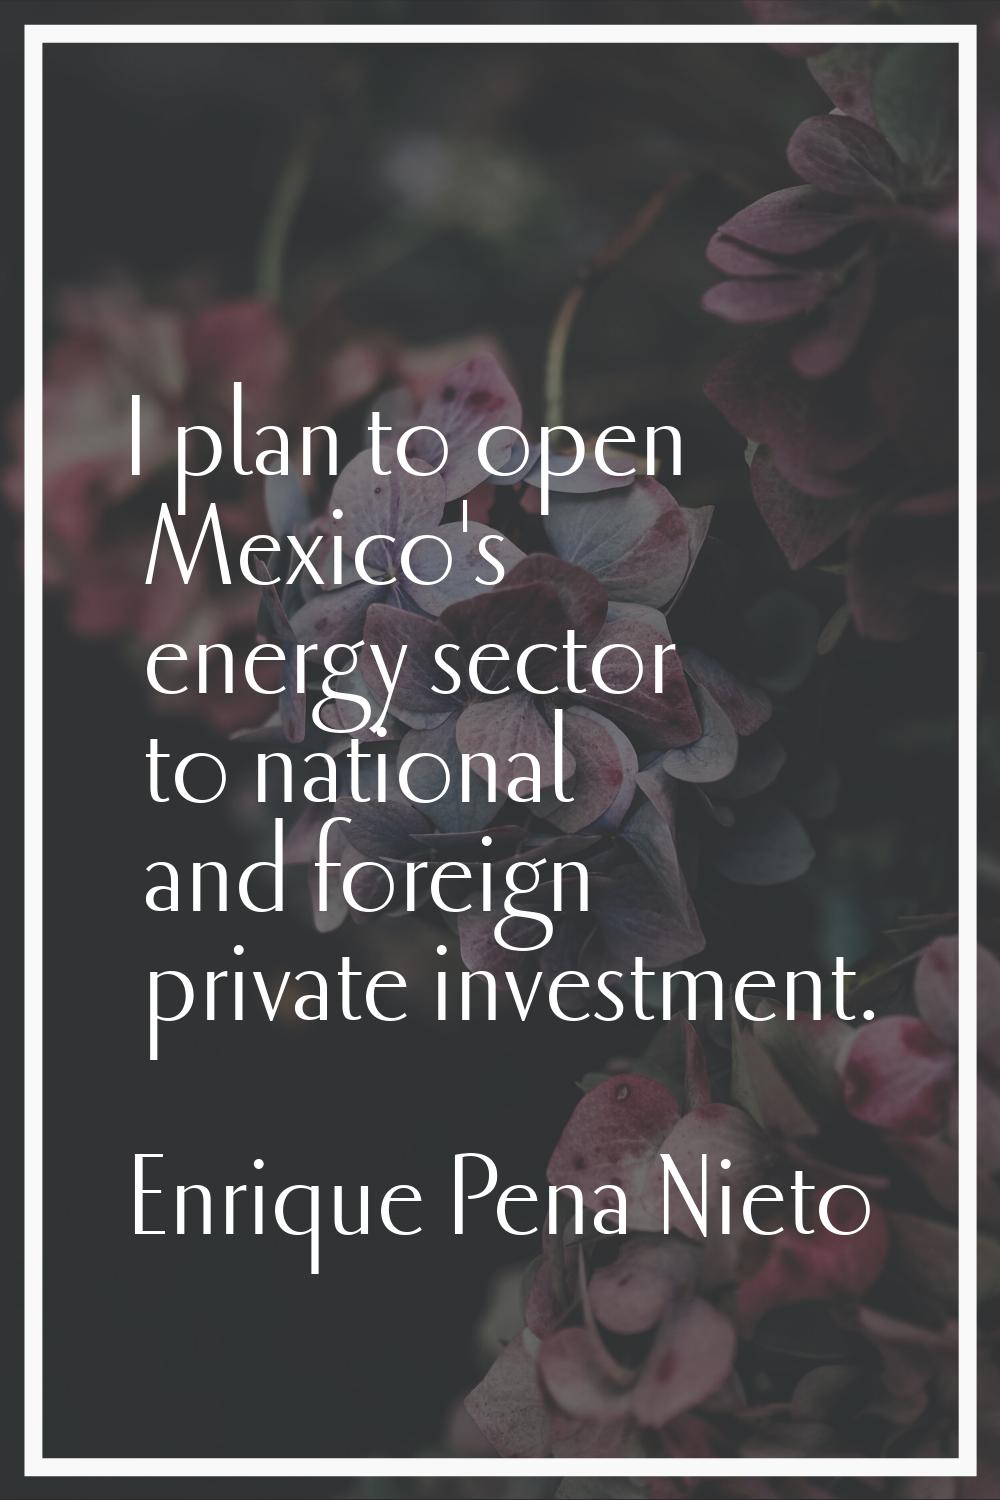 I plan to open Mexico's energy sector to national and foreign private investment.